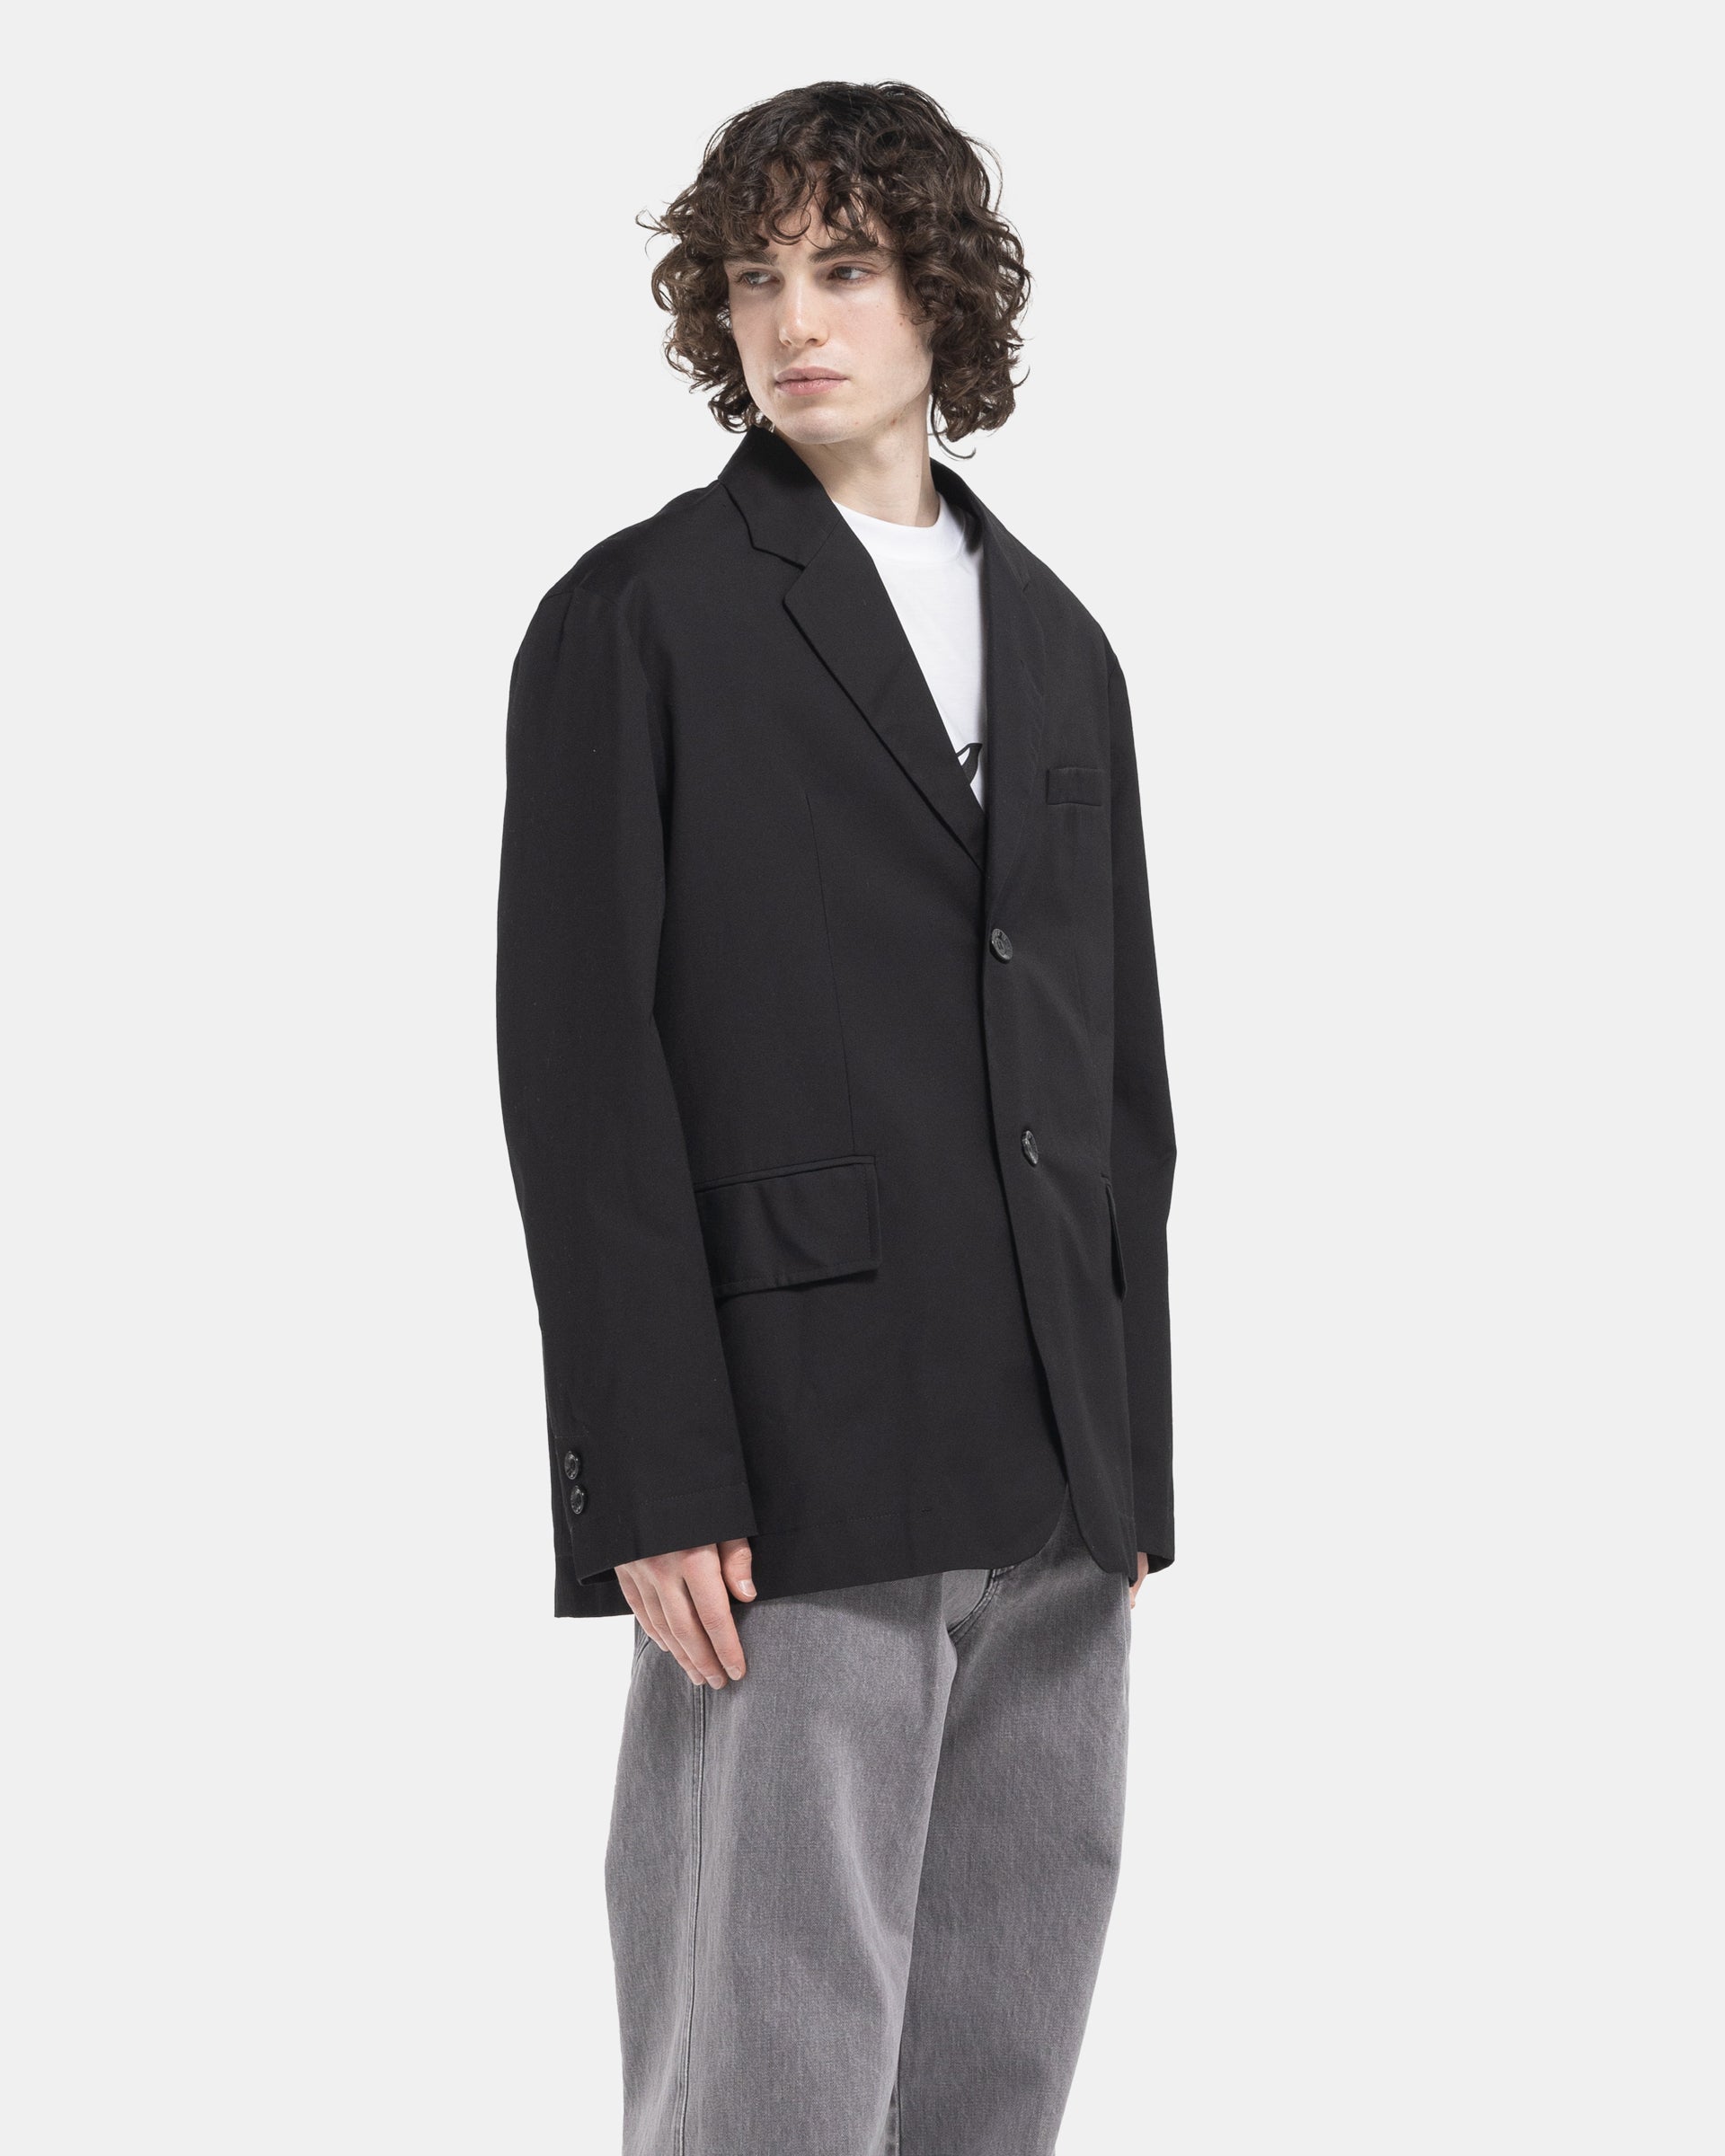 Song For The Mute Square Blazer in Black Side